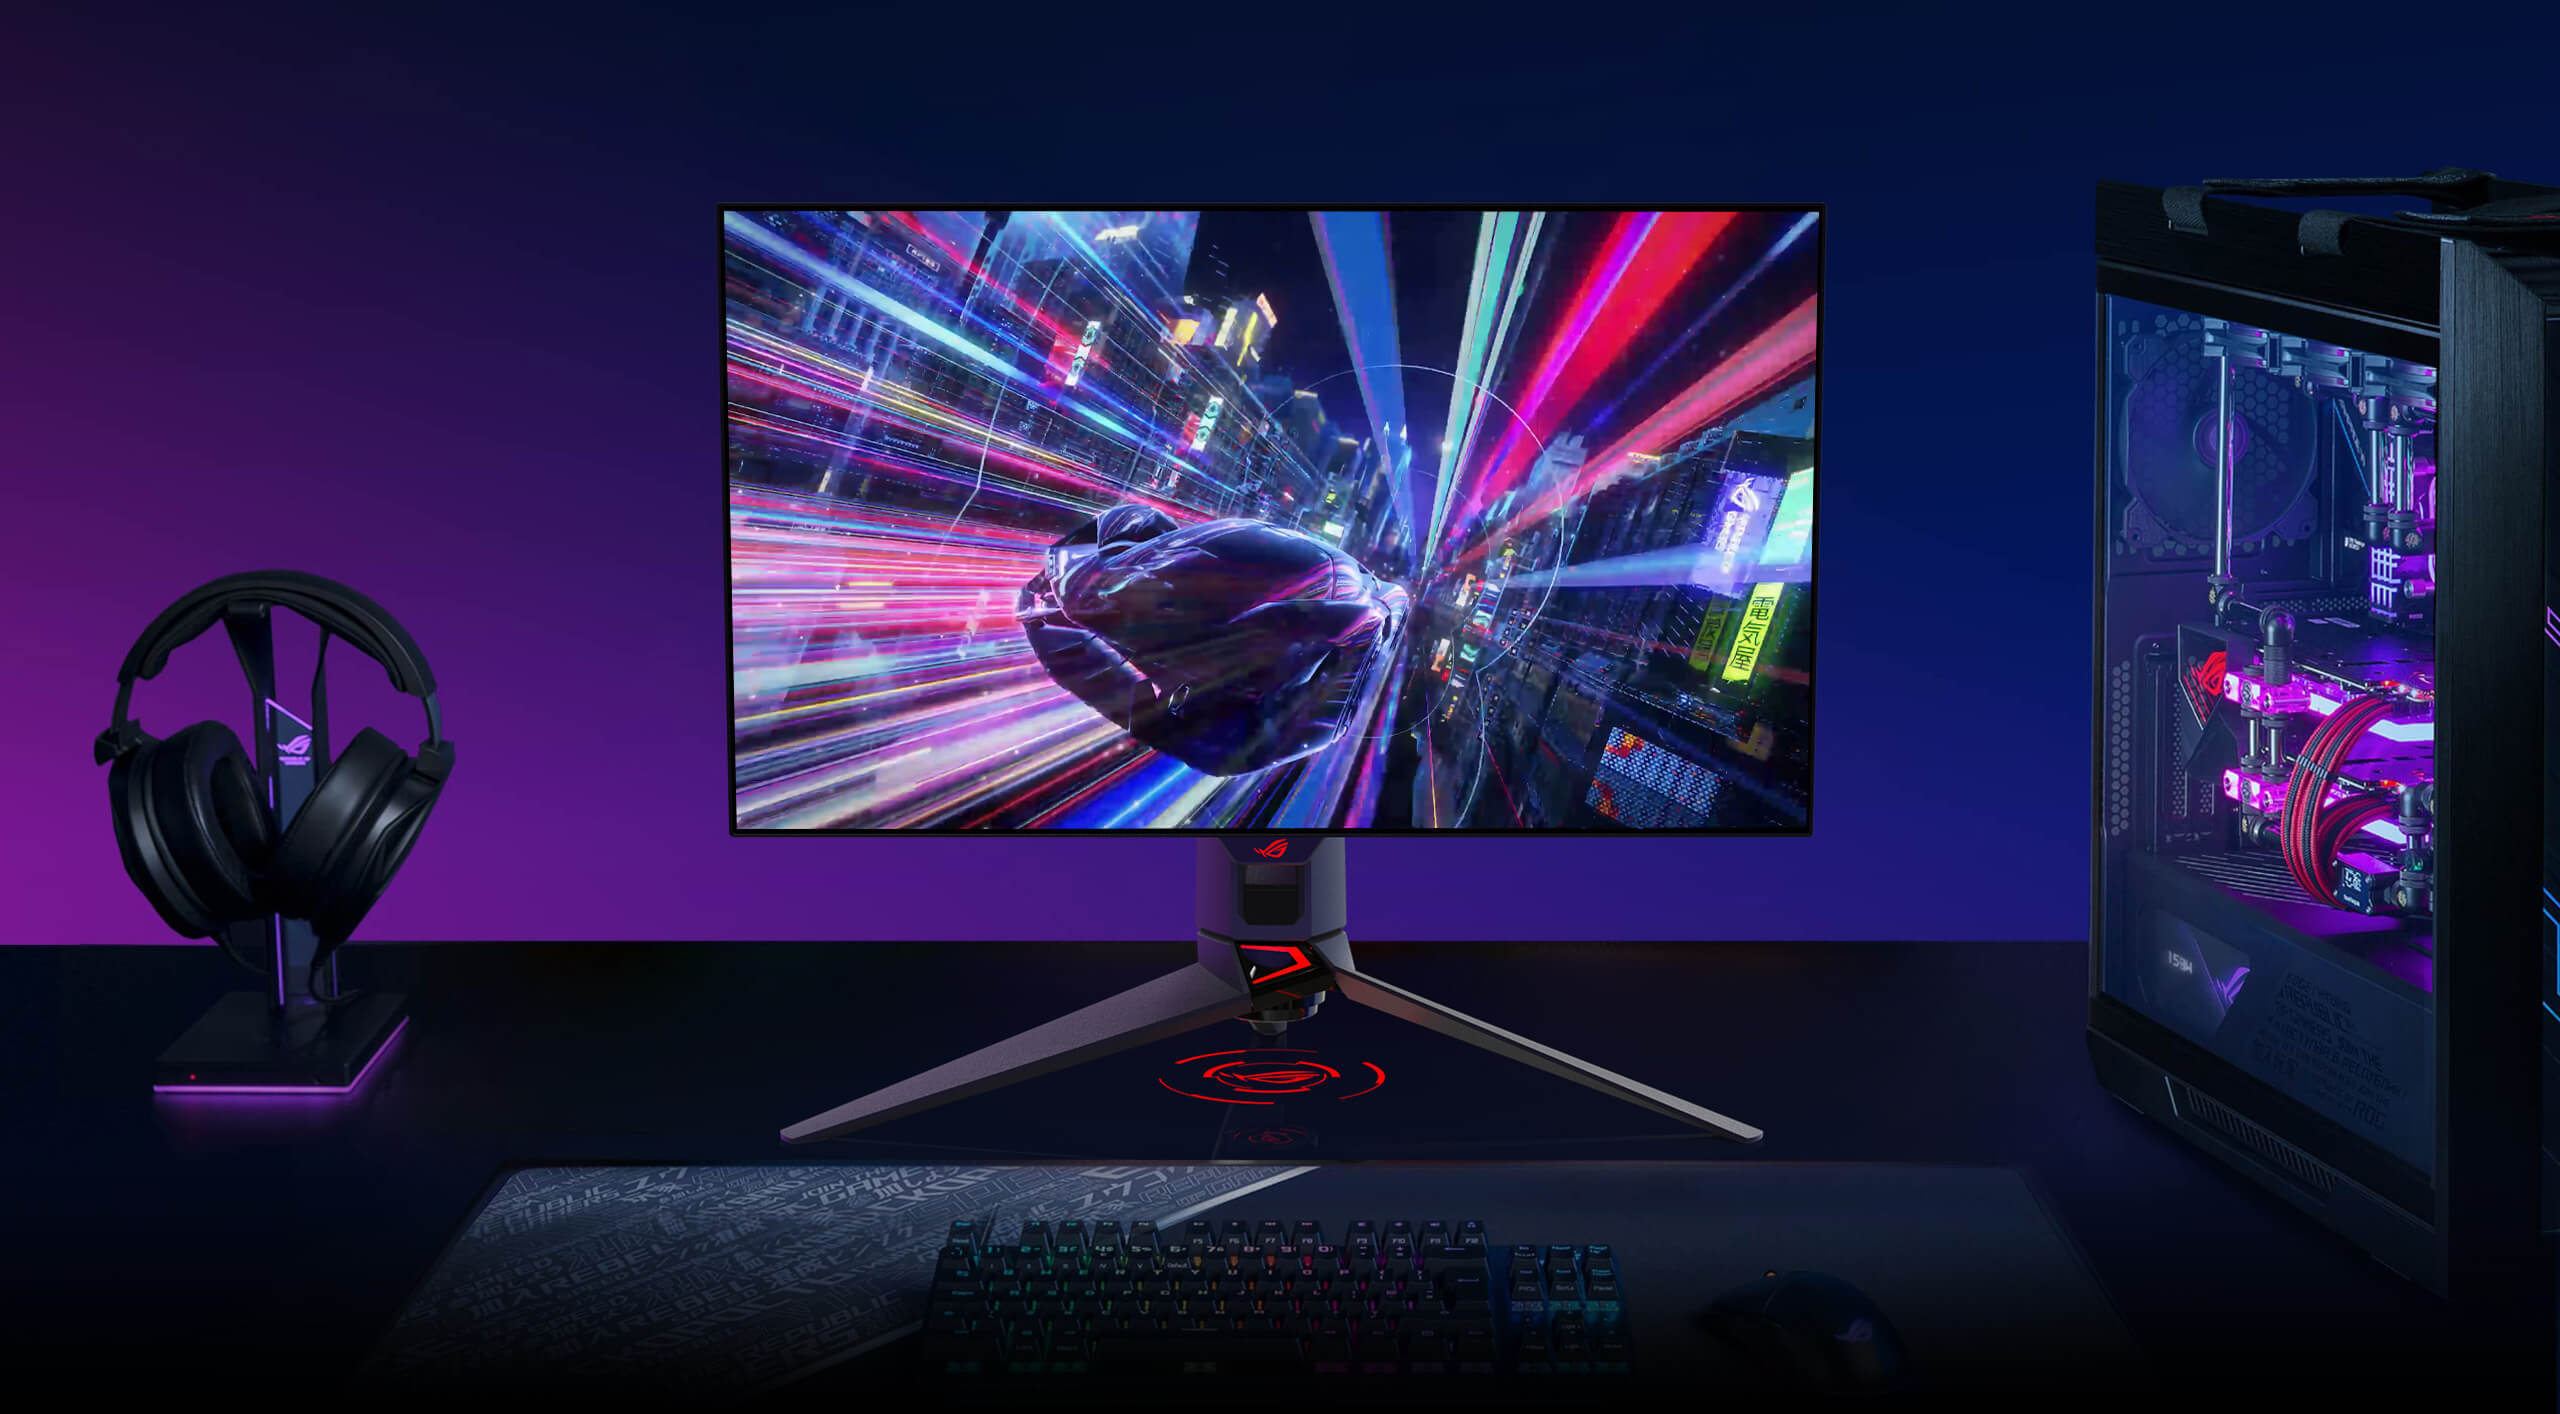 The PG27AQDM is a 27-inch 240 Hz OLED gaming monitor that offers exceptional gaming visuals.